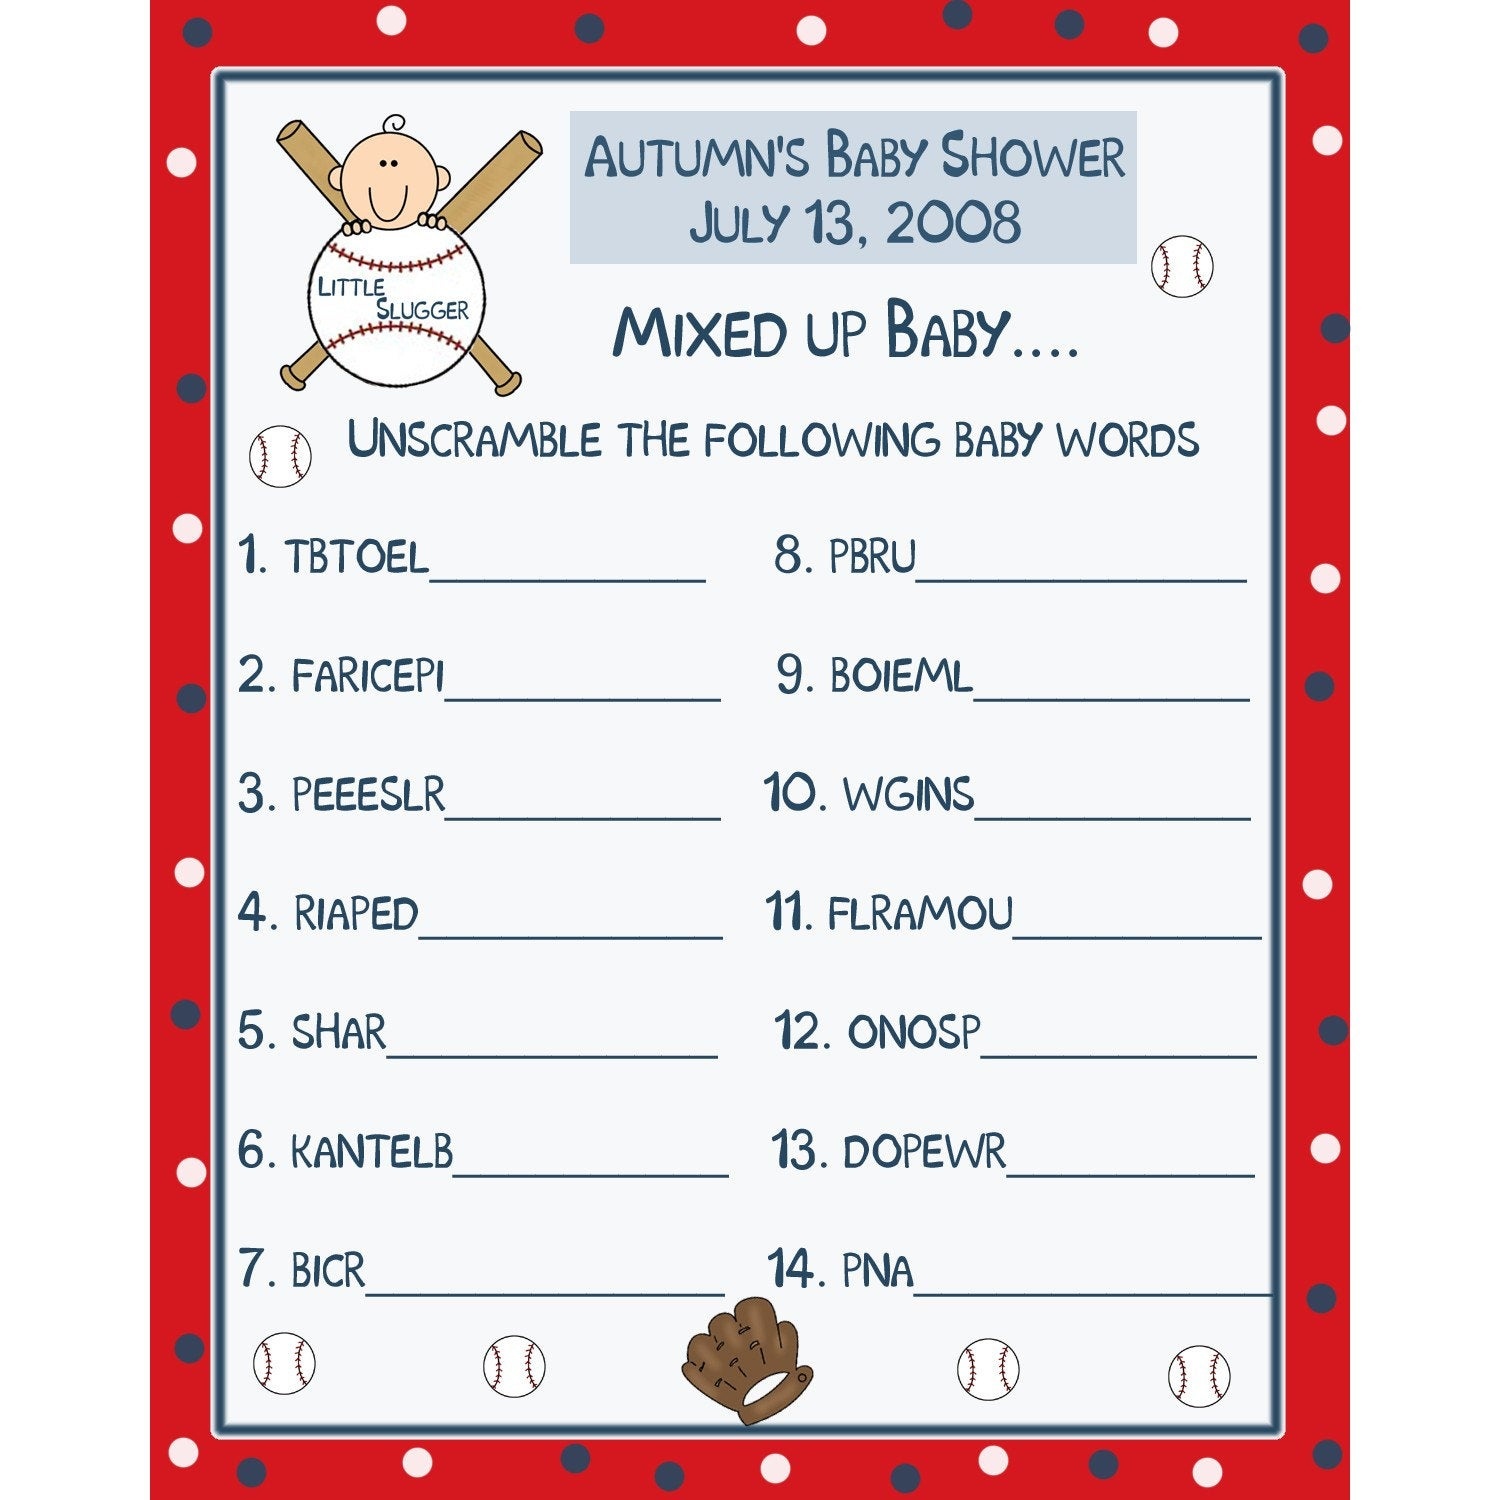 Get Free Baby Things Online Outlet, Free Baby Shower Games In - Free Printable Baby Shower Games In Spanish